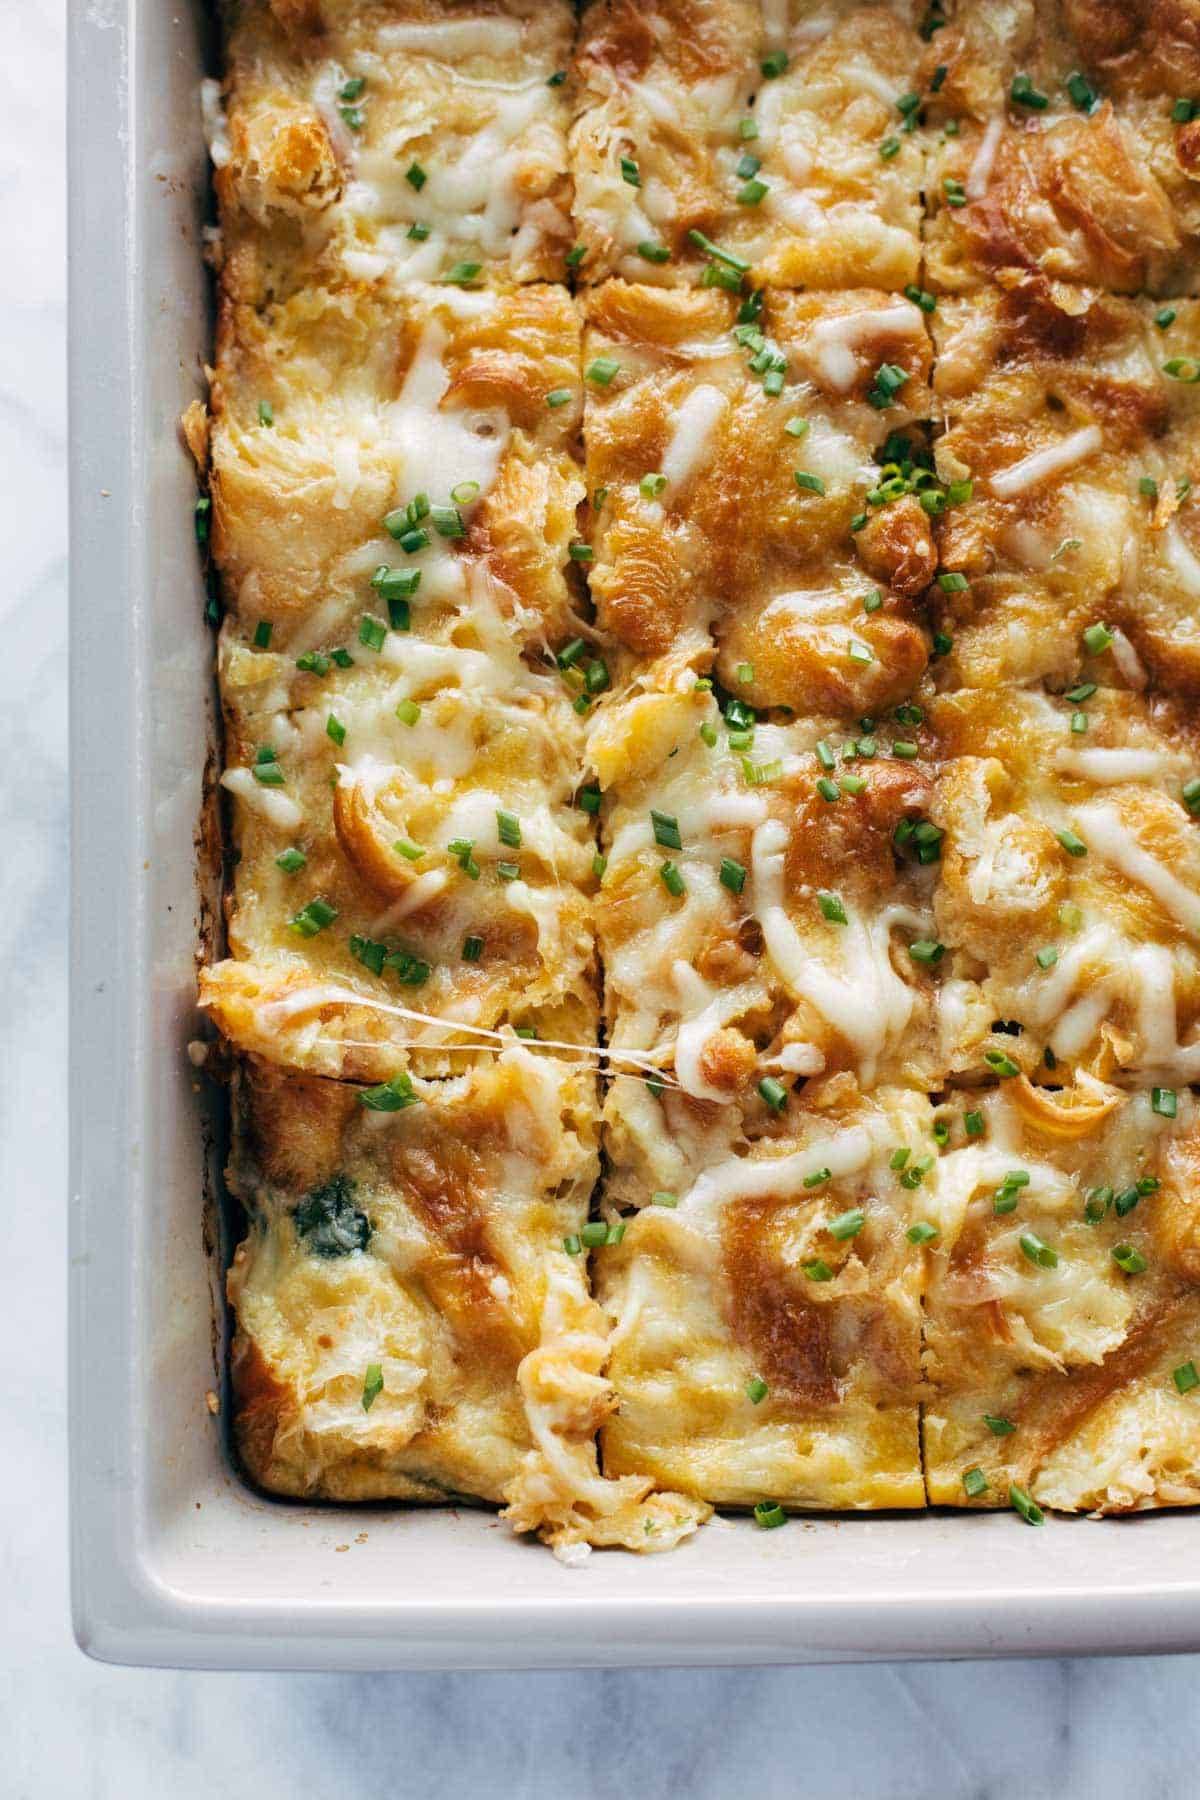 Egg and croissant brunch bake in pan.